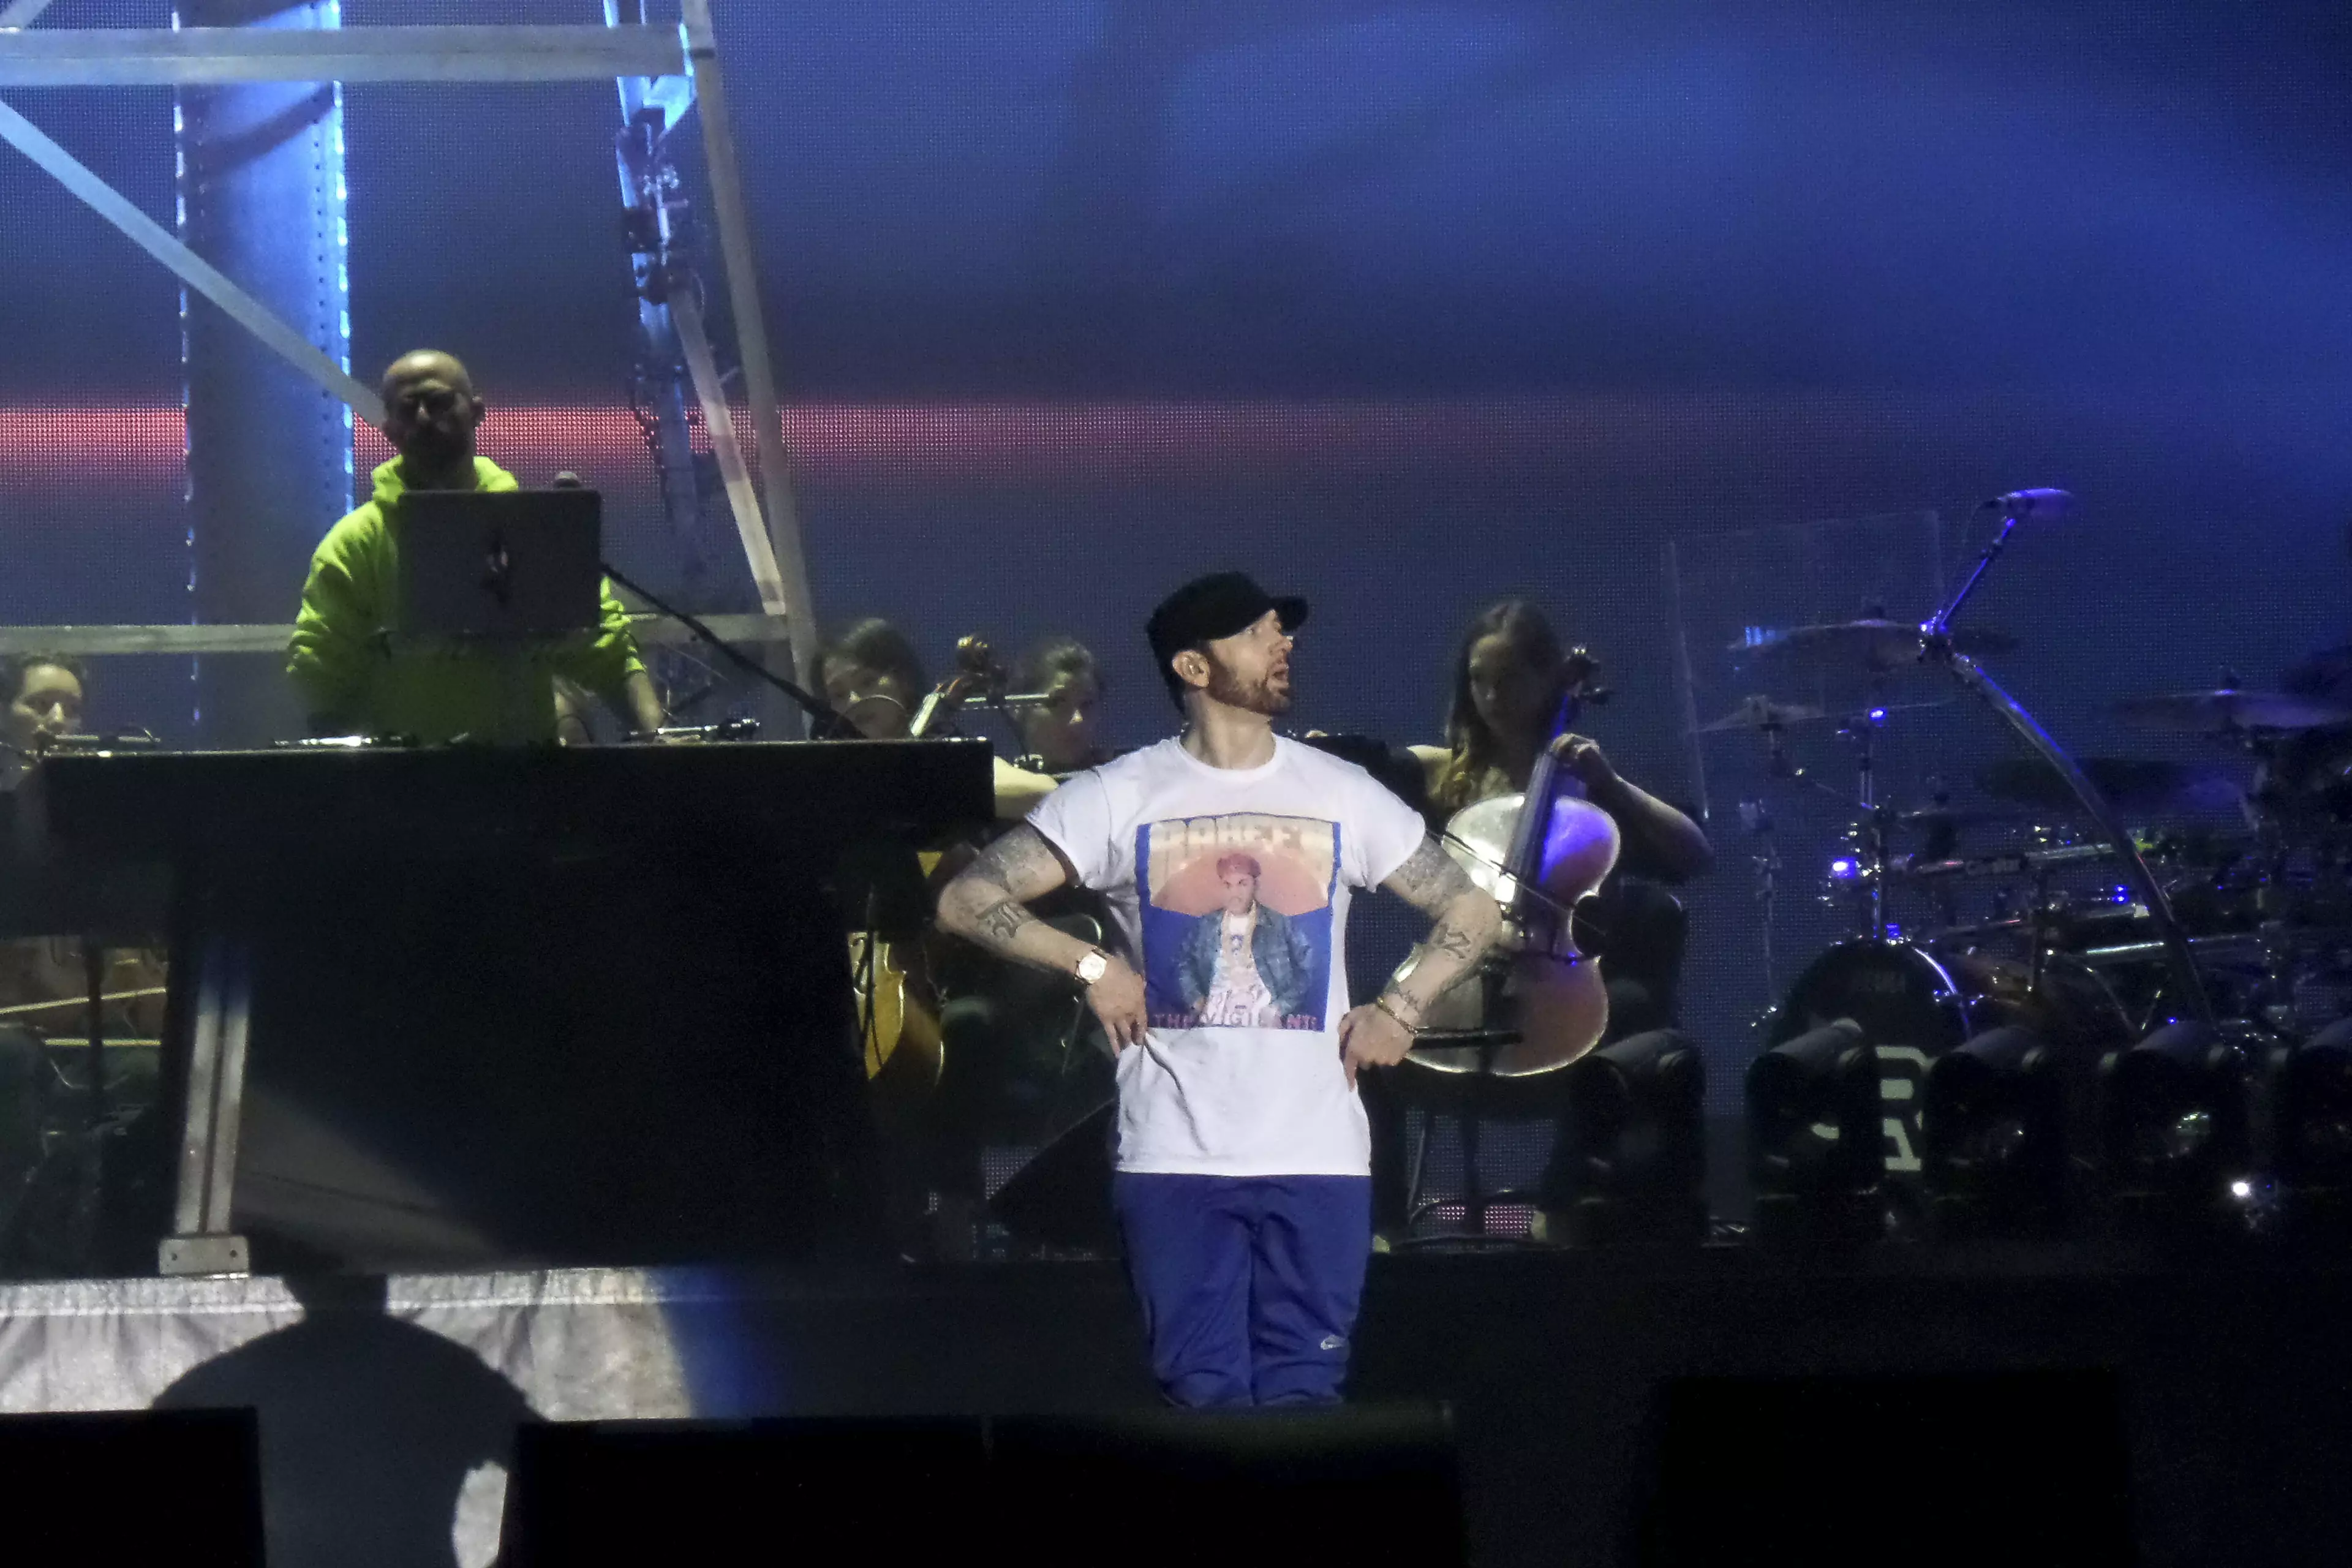 Eminem will be performing his 'revival' tour.